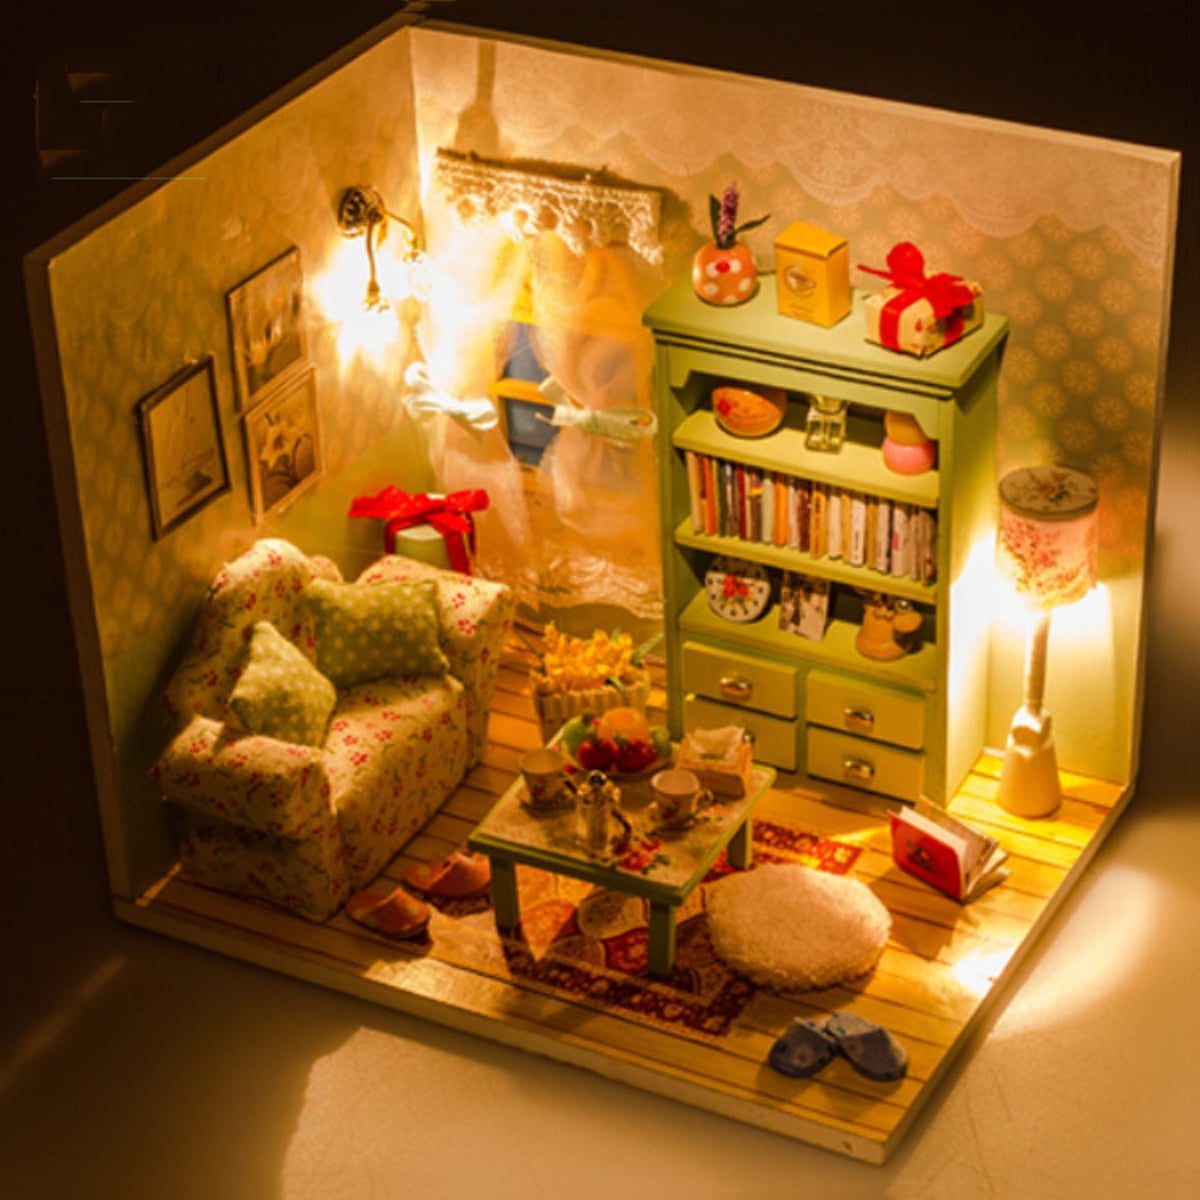 in a Happy Corner DIY Wooden Doll House Kit Box Theater Style 1:24 Scale Creative Room Idea Best Gift for Children Friend Lover Dollhouse Miniature with Furniture